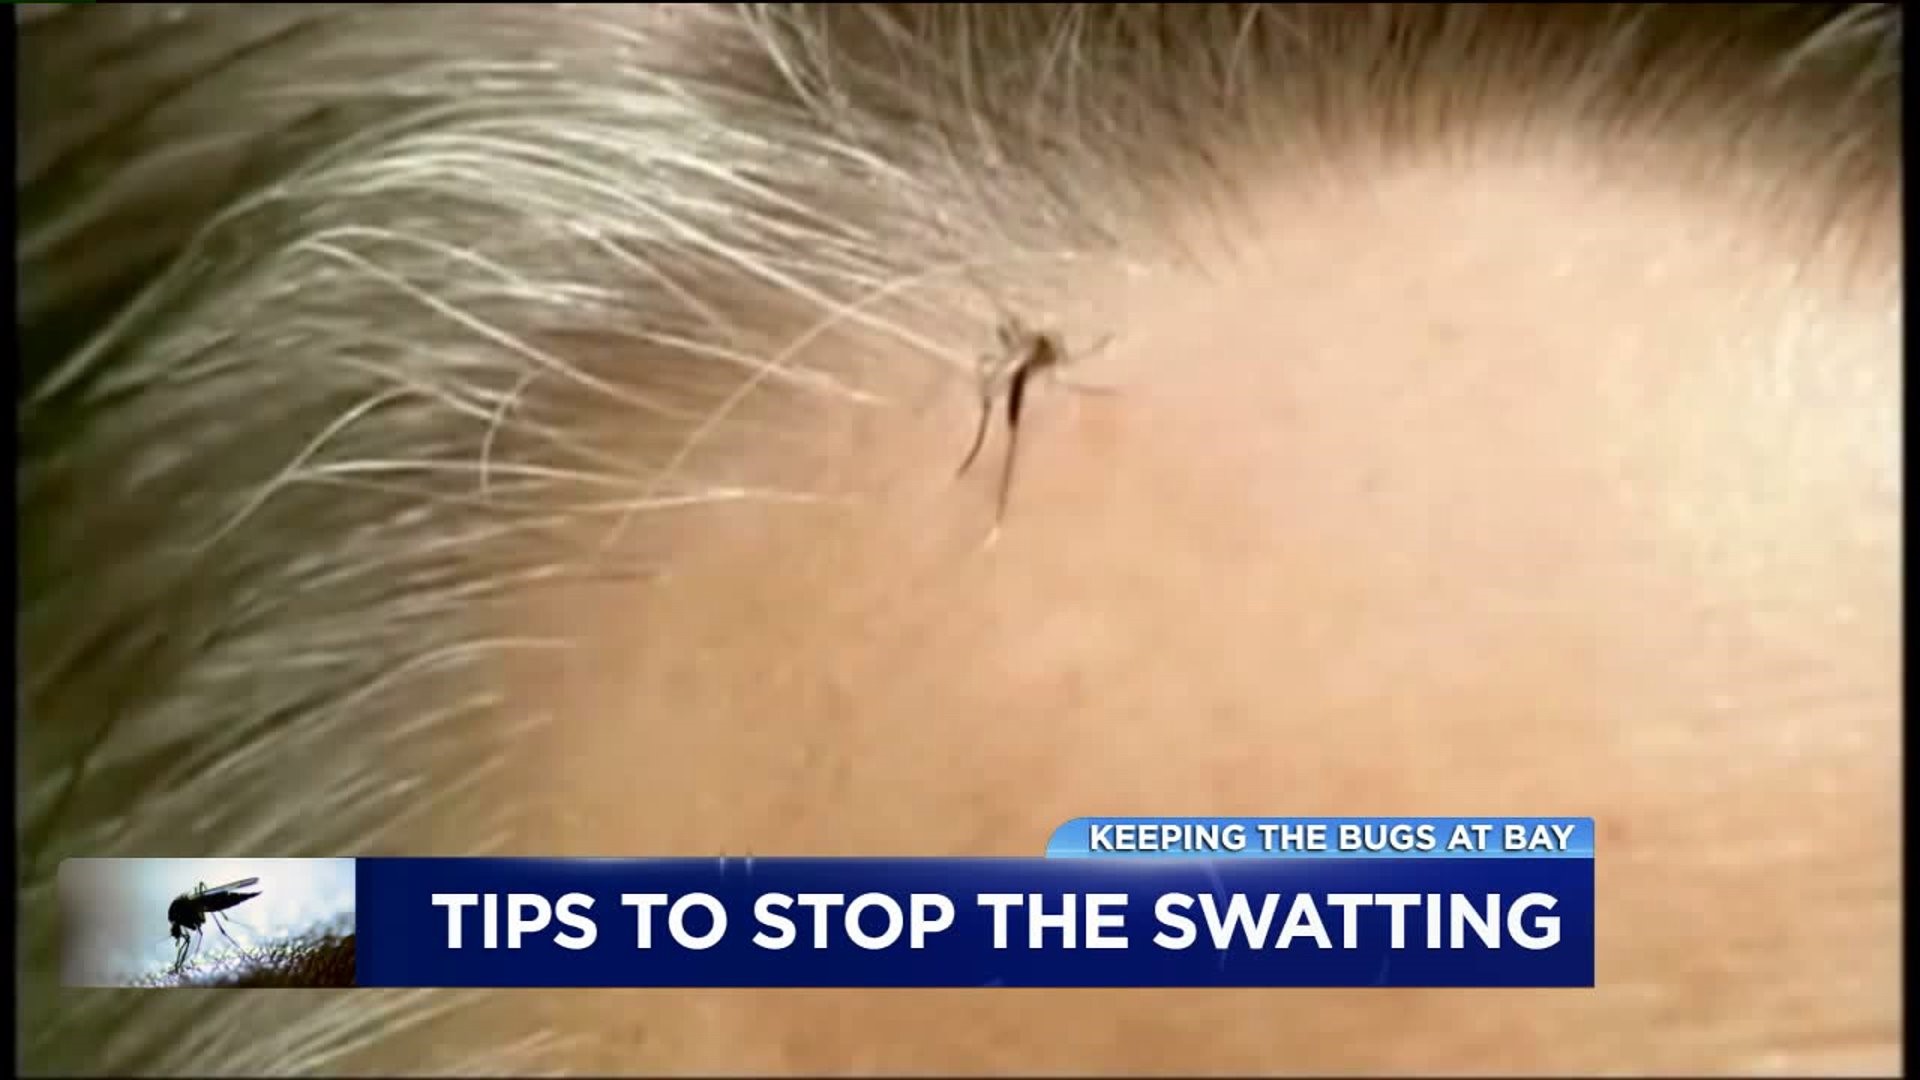 Bugs Biting: Tips to Stop the Swatting